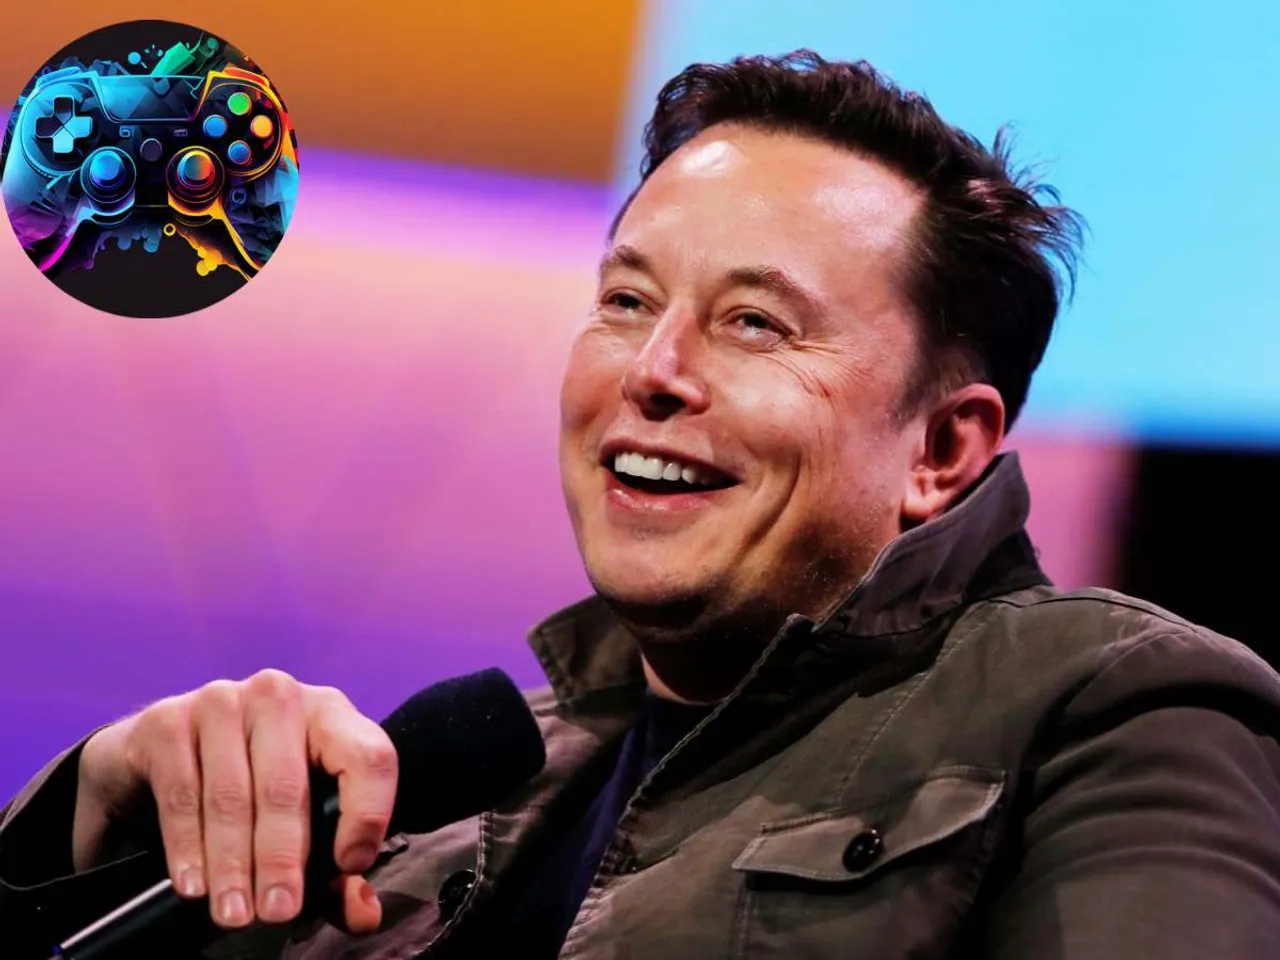 Top 5 video games gamers should play, according to Elon Musk